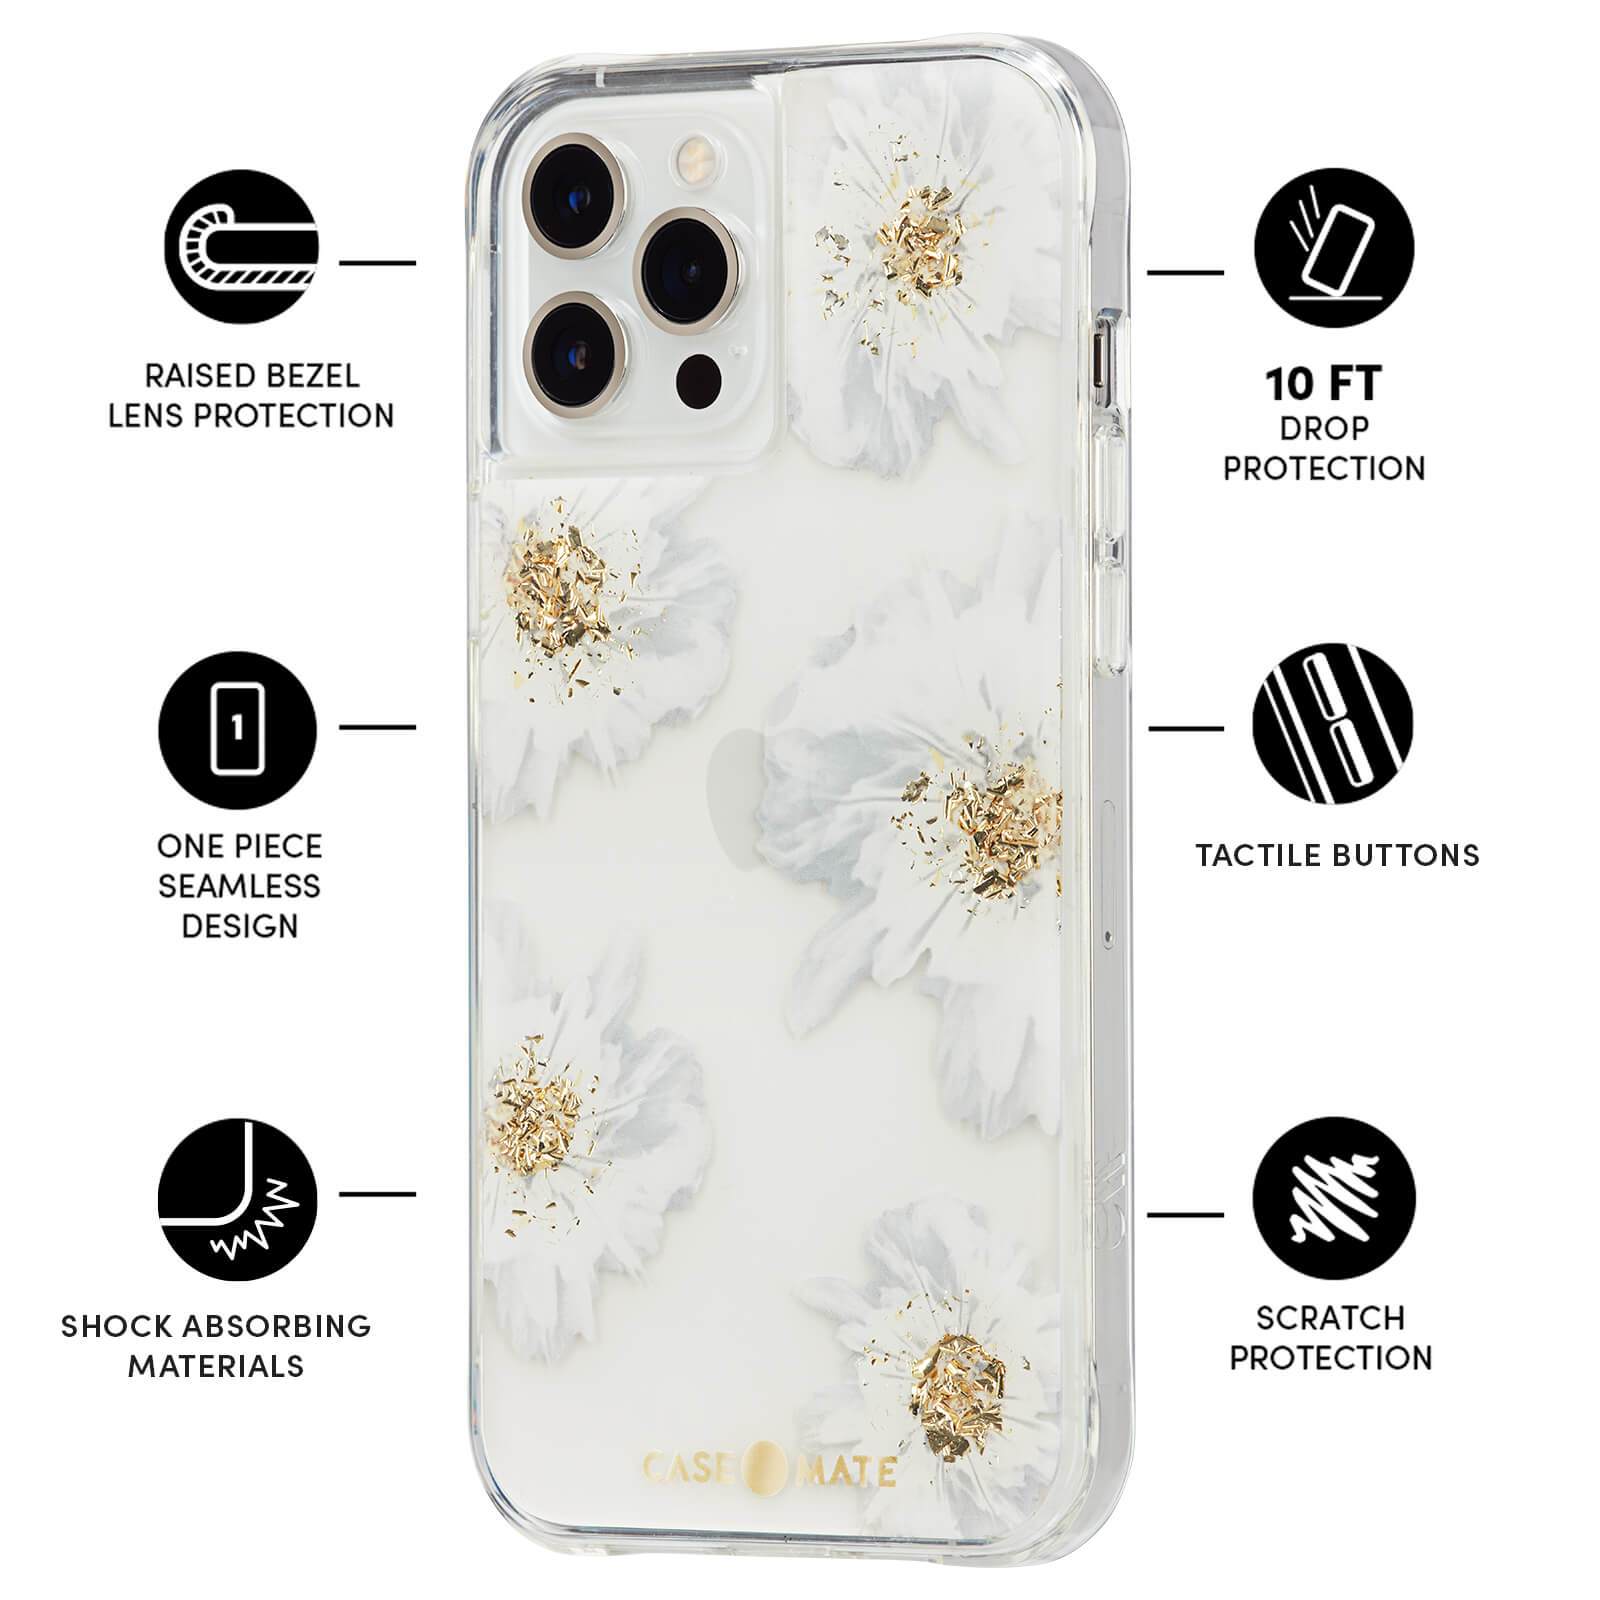 Features Raised Bezel Lens Protection, One Piece Seamless Design, Shock Absorbing Materials, 10 ft Drop Protection, Tactile Buttons, Scratch Protection. color::Karat Floral